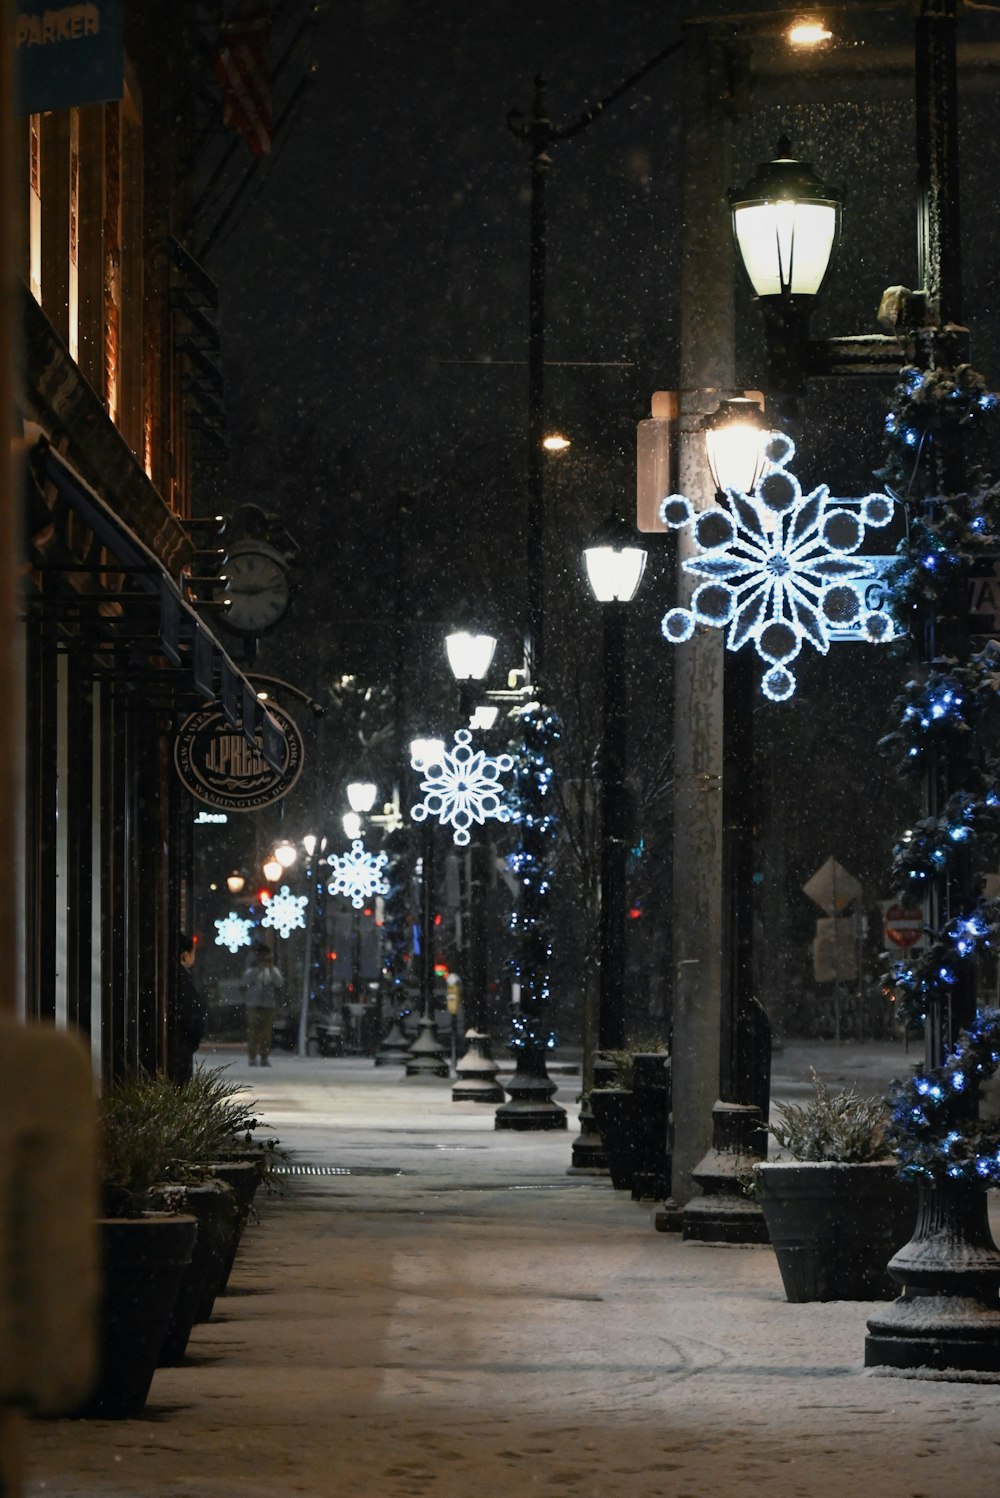 a snowy street at night with street lights and a snowflake